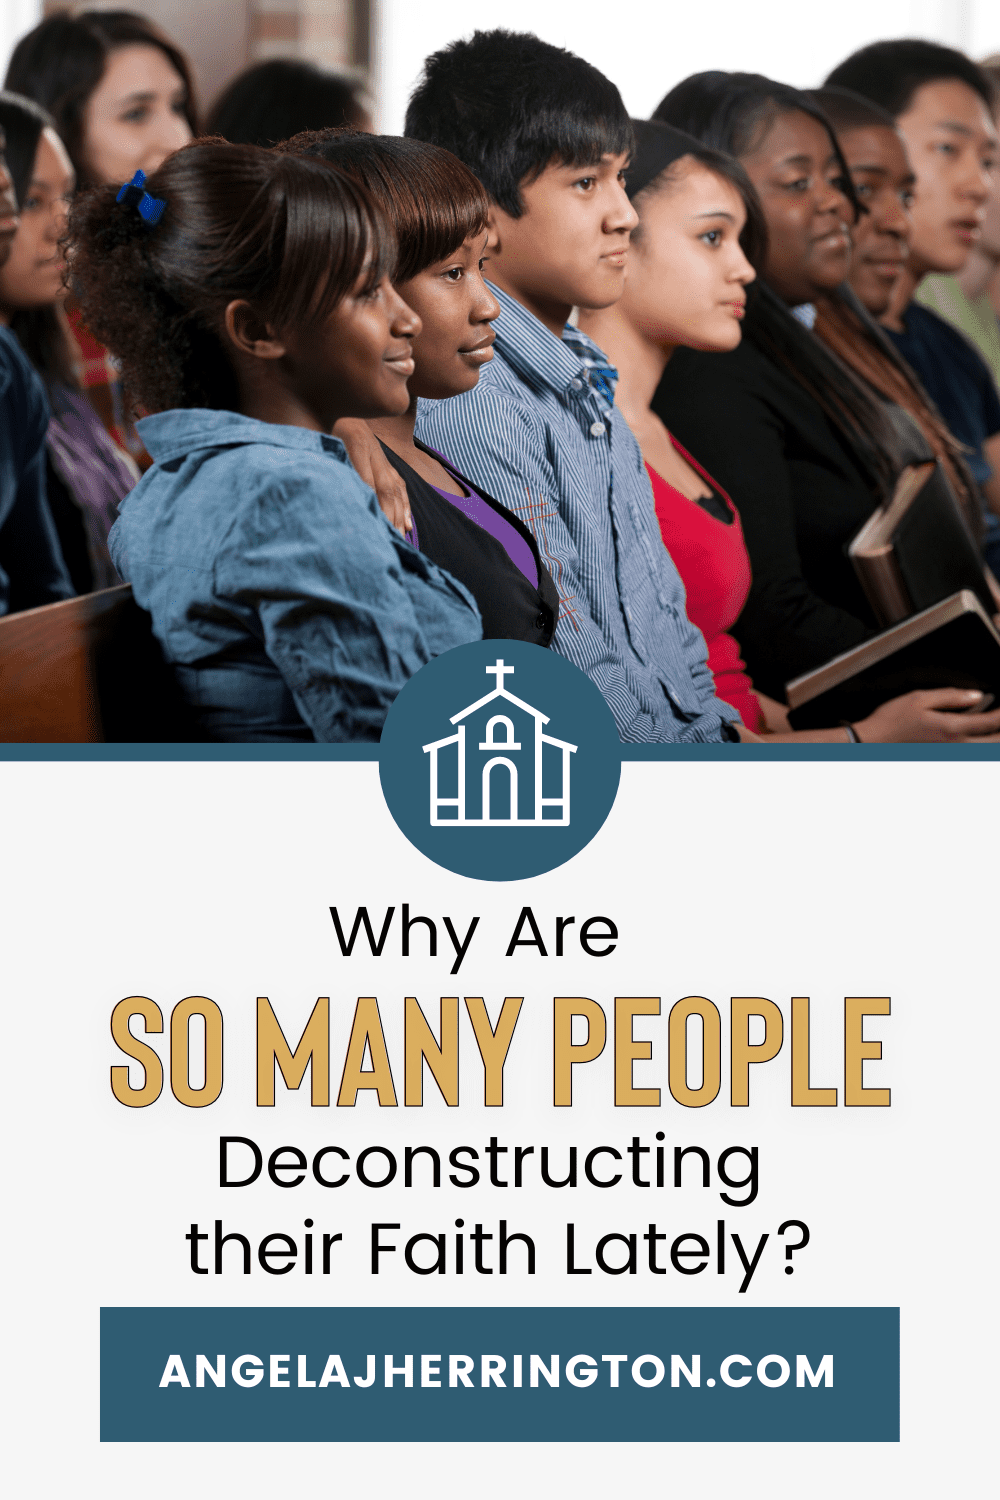 Why are so many people deconstructing their faith lately written on a background of teens sitting in pews.